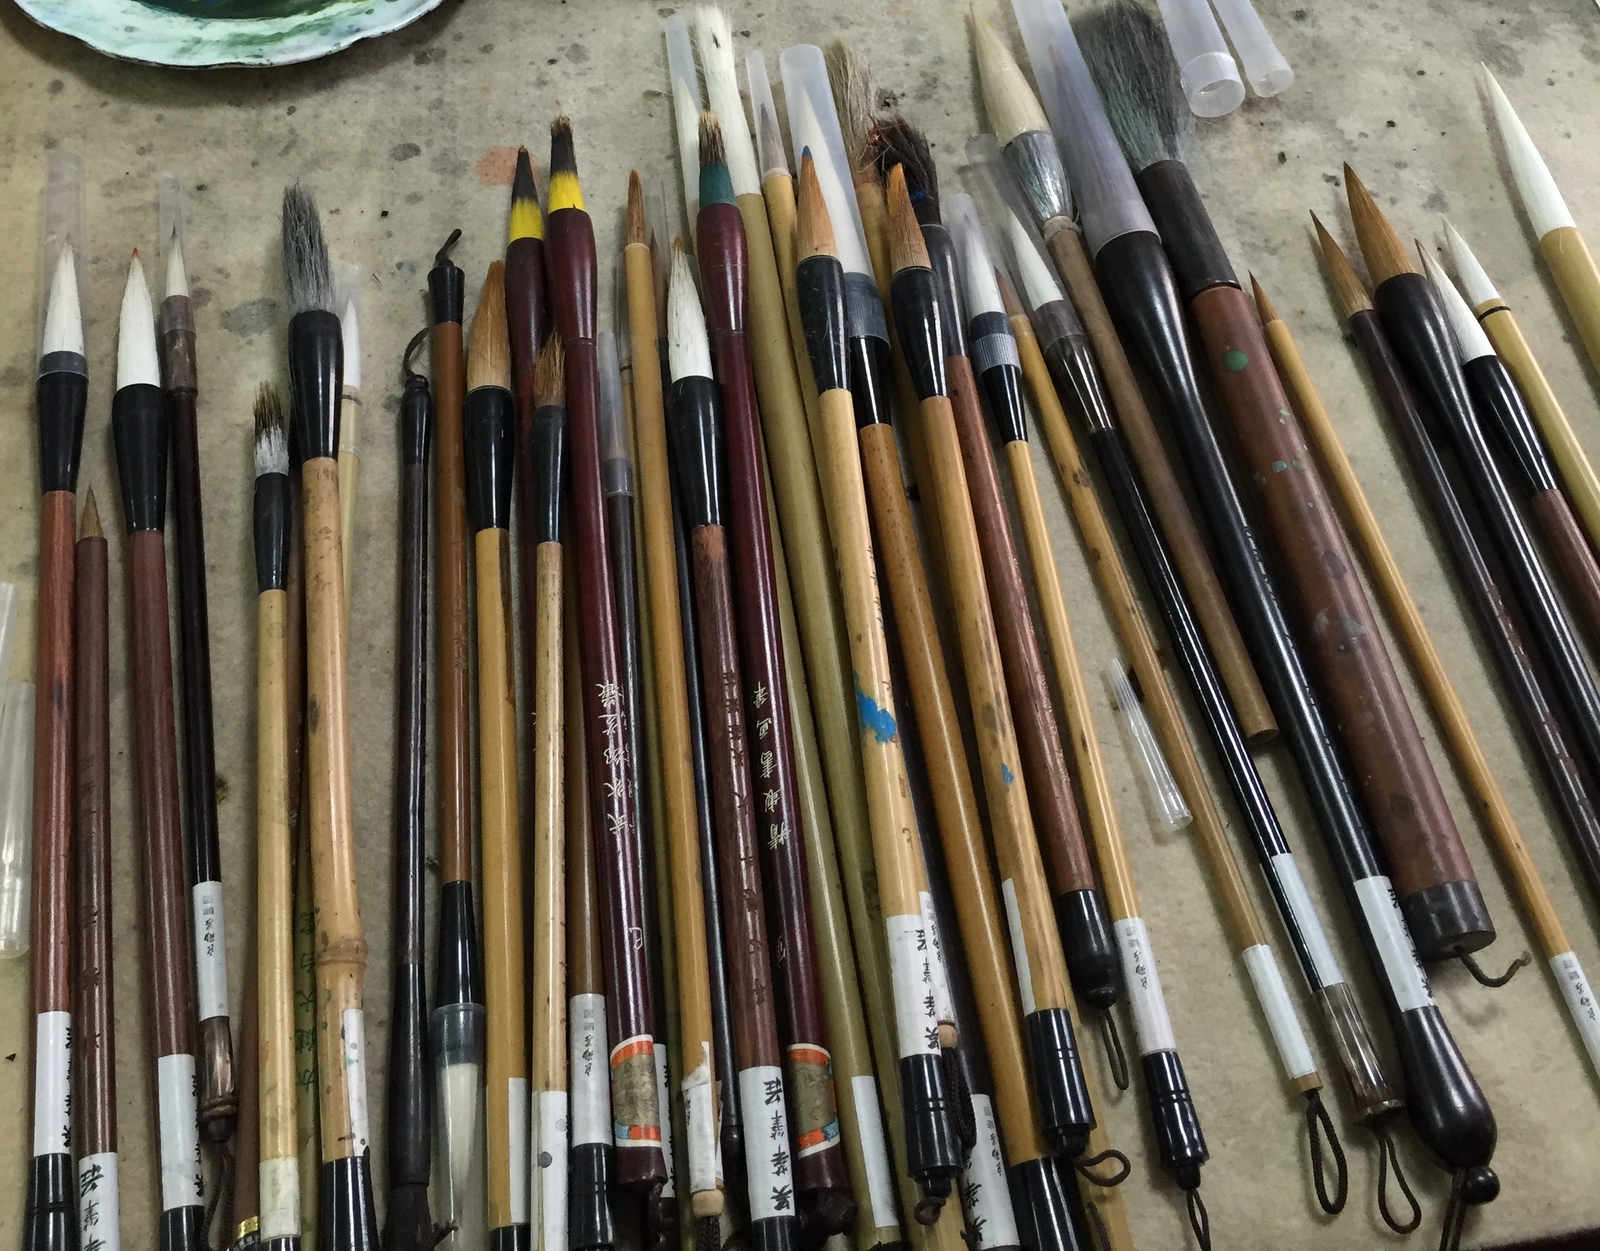 Chinese Calligraphy Set for Chinese writings: brushes, ink stick, stone